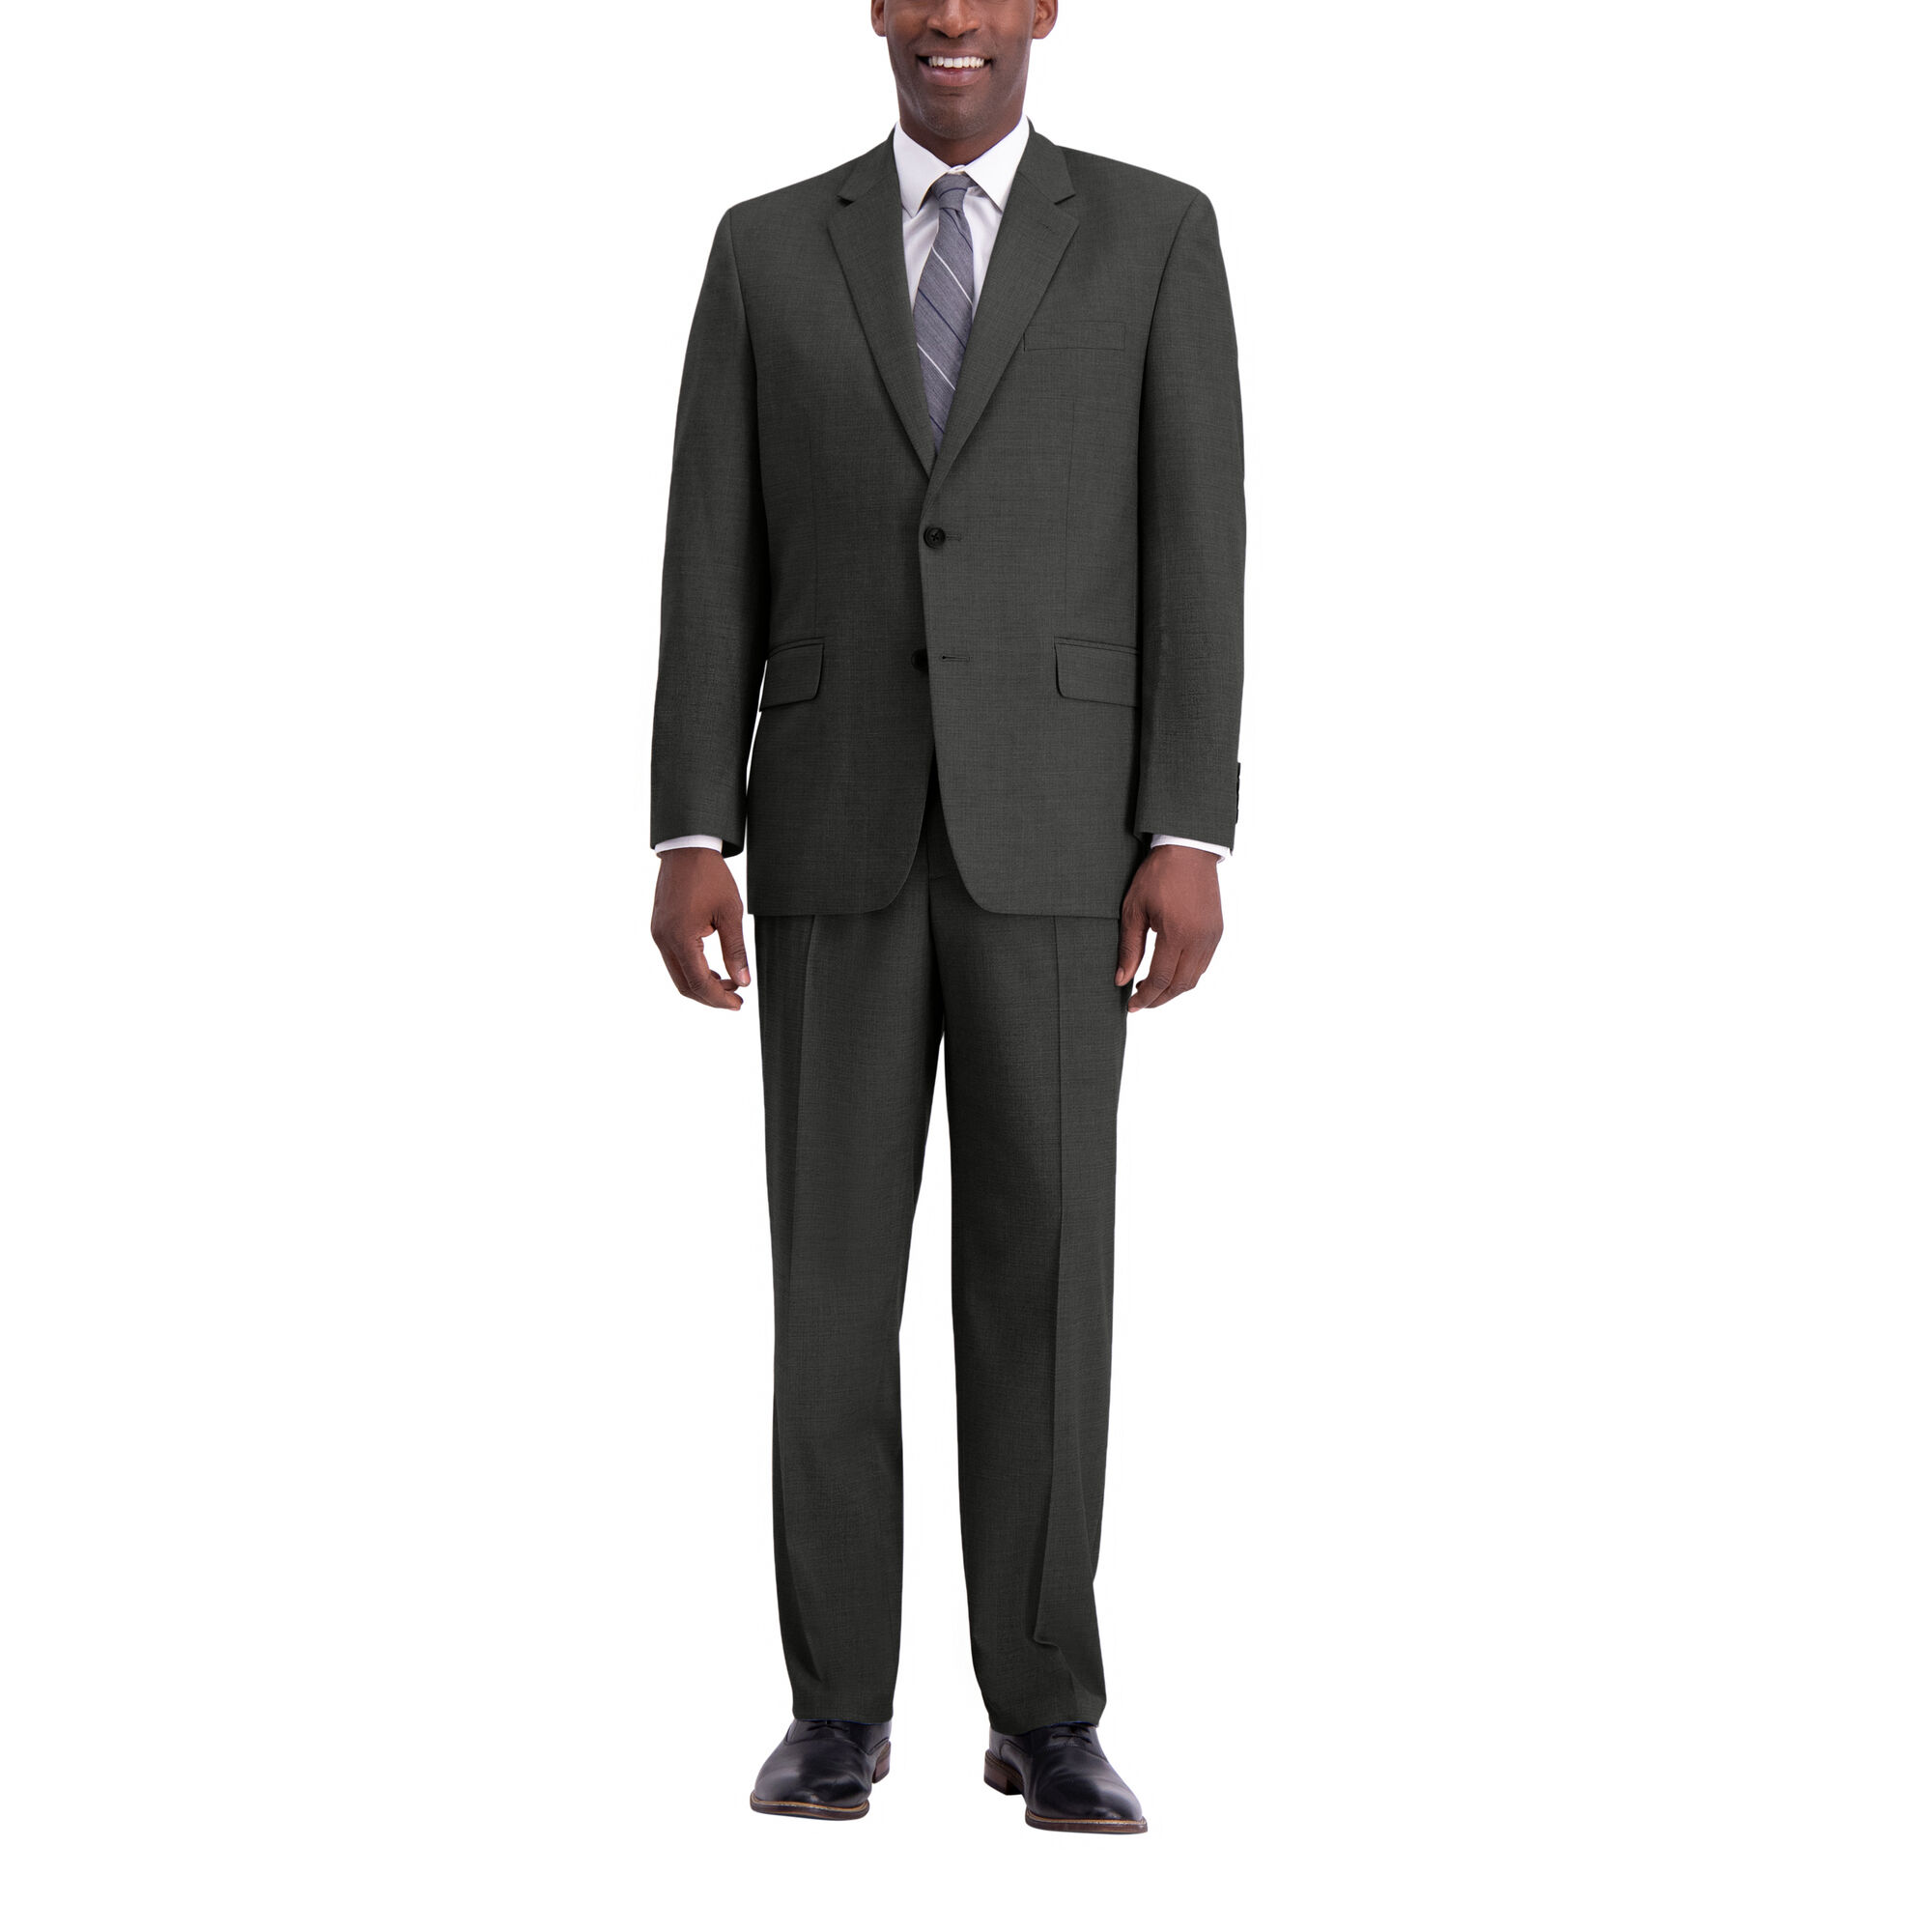 J.M. Haggar Texture Weave Suit Jacket Med Grey (HZ00314 Clothing Suits) photo